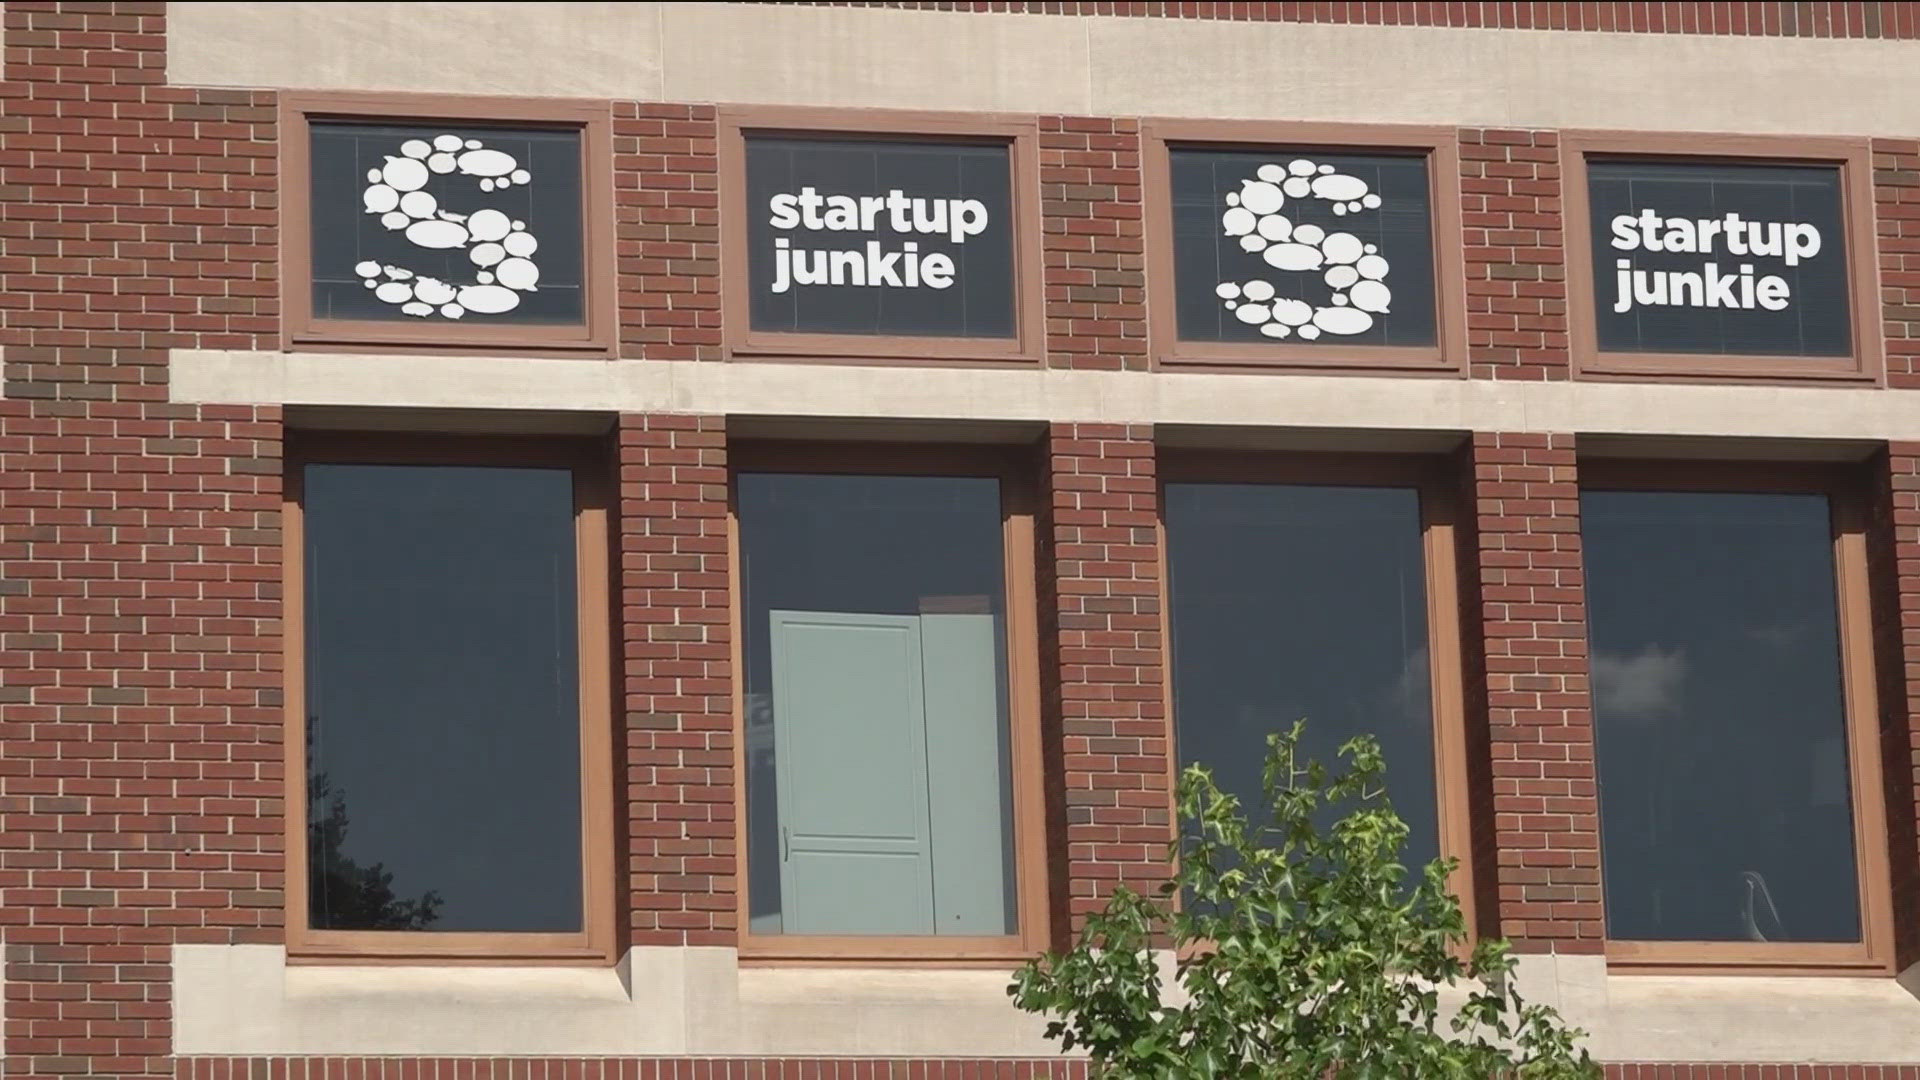 The largest startup competition in the world is coming to Fayetteville in August with a chance for a business startup to win $1 million.